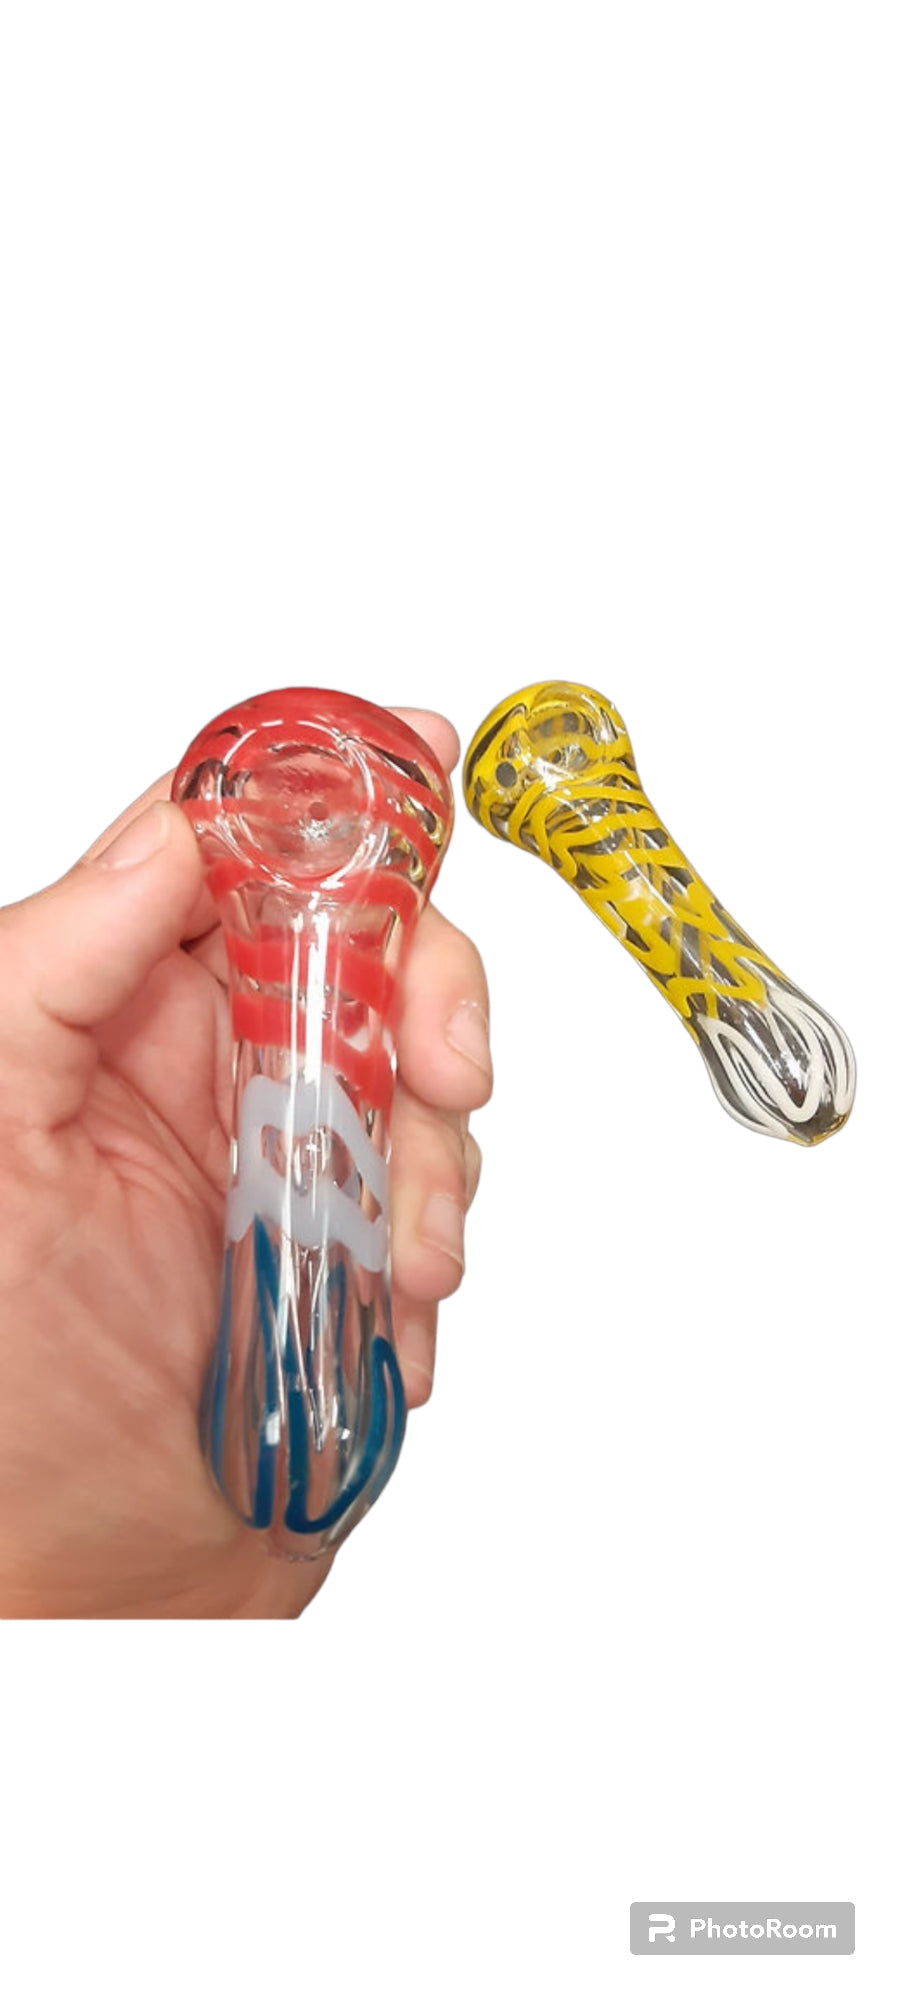 Swirled Colored Pipes